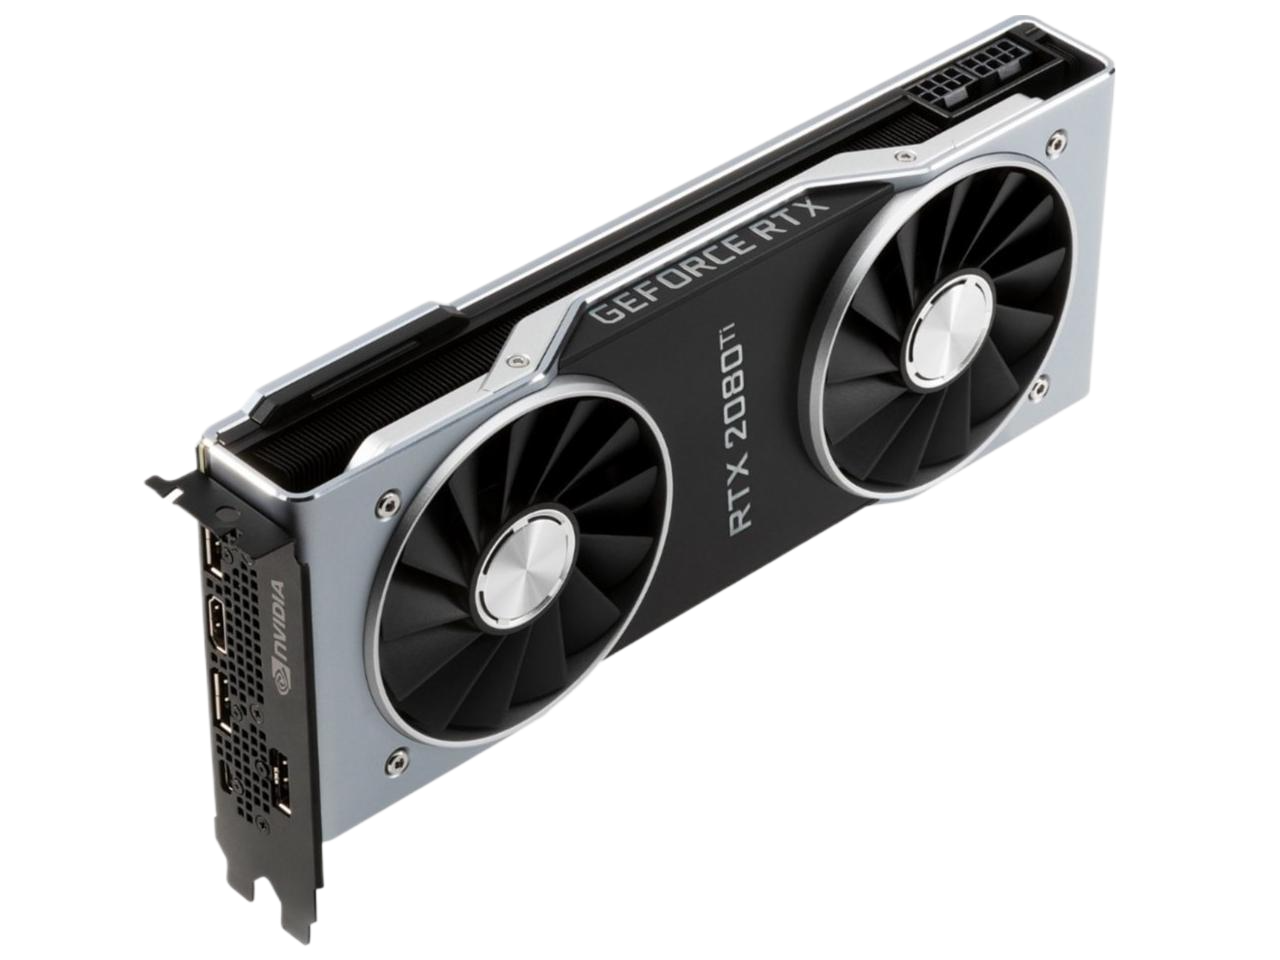 NVIDIA GeForce RTX 2080 Ti Founders Edition 11GB GDDR6 PCI Express 3.0 Graphics Card